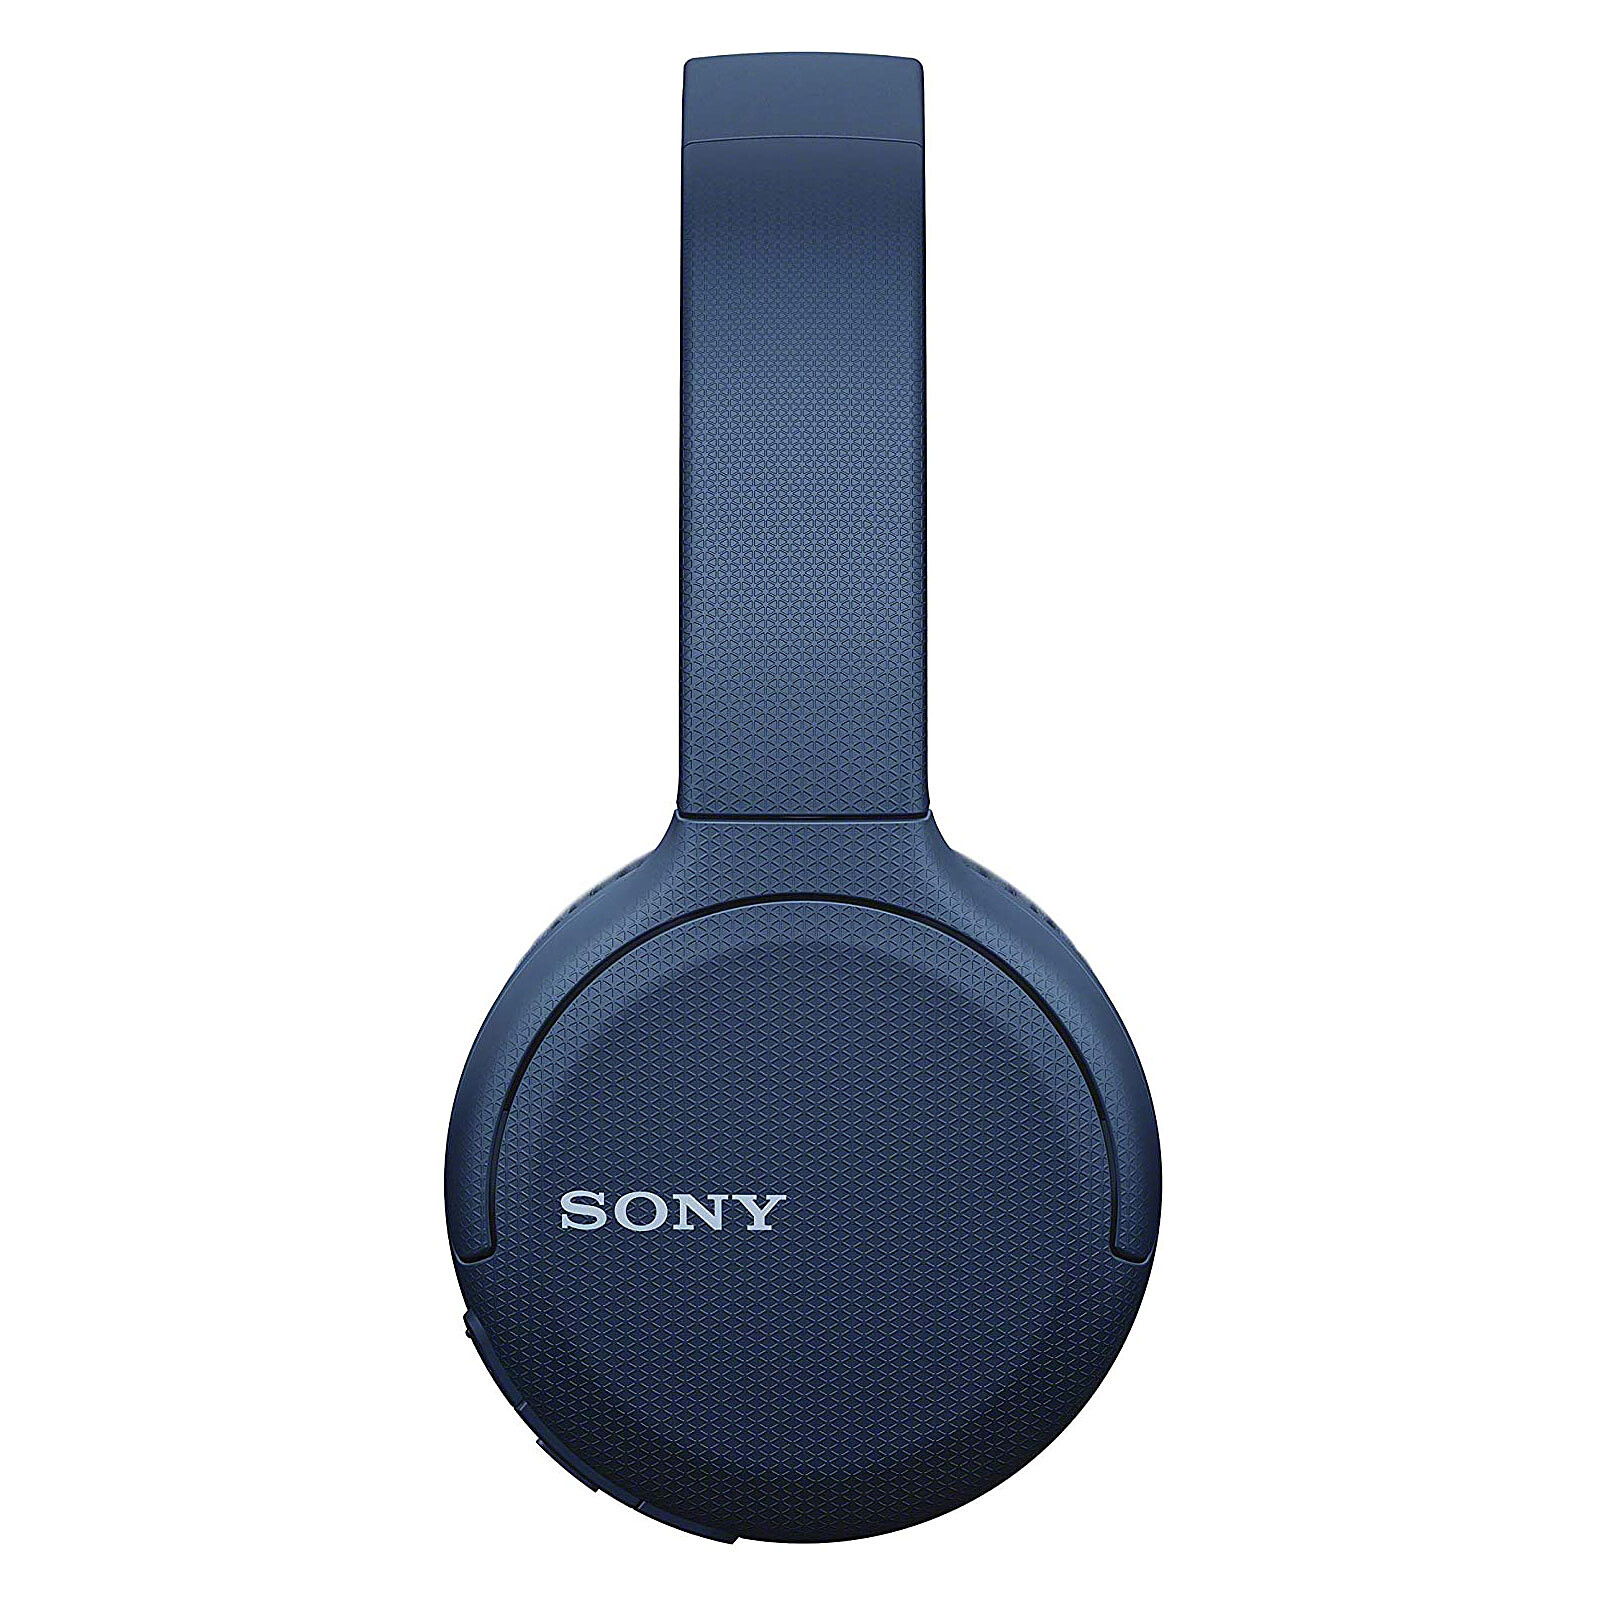 SONY Wireless Headphones WH-CH510 Bluetooth Blue WH-CH510 L w/ Tracking NEW